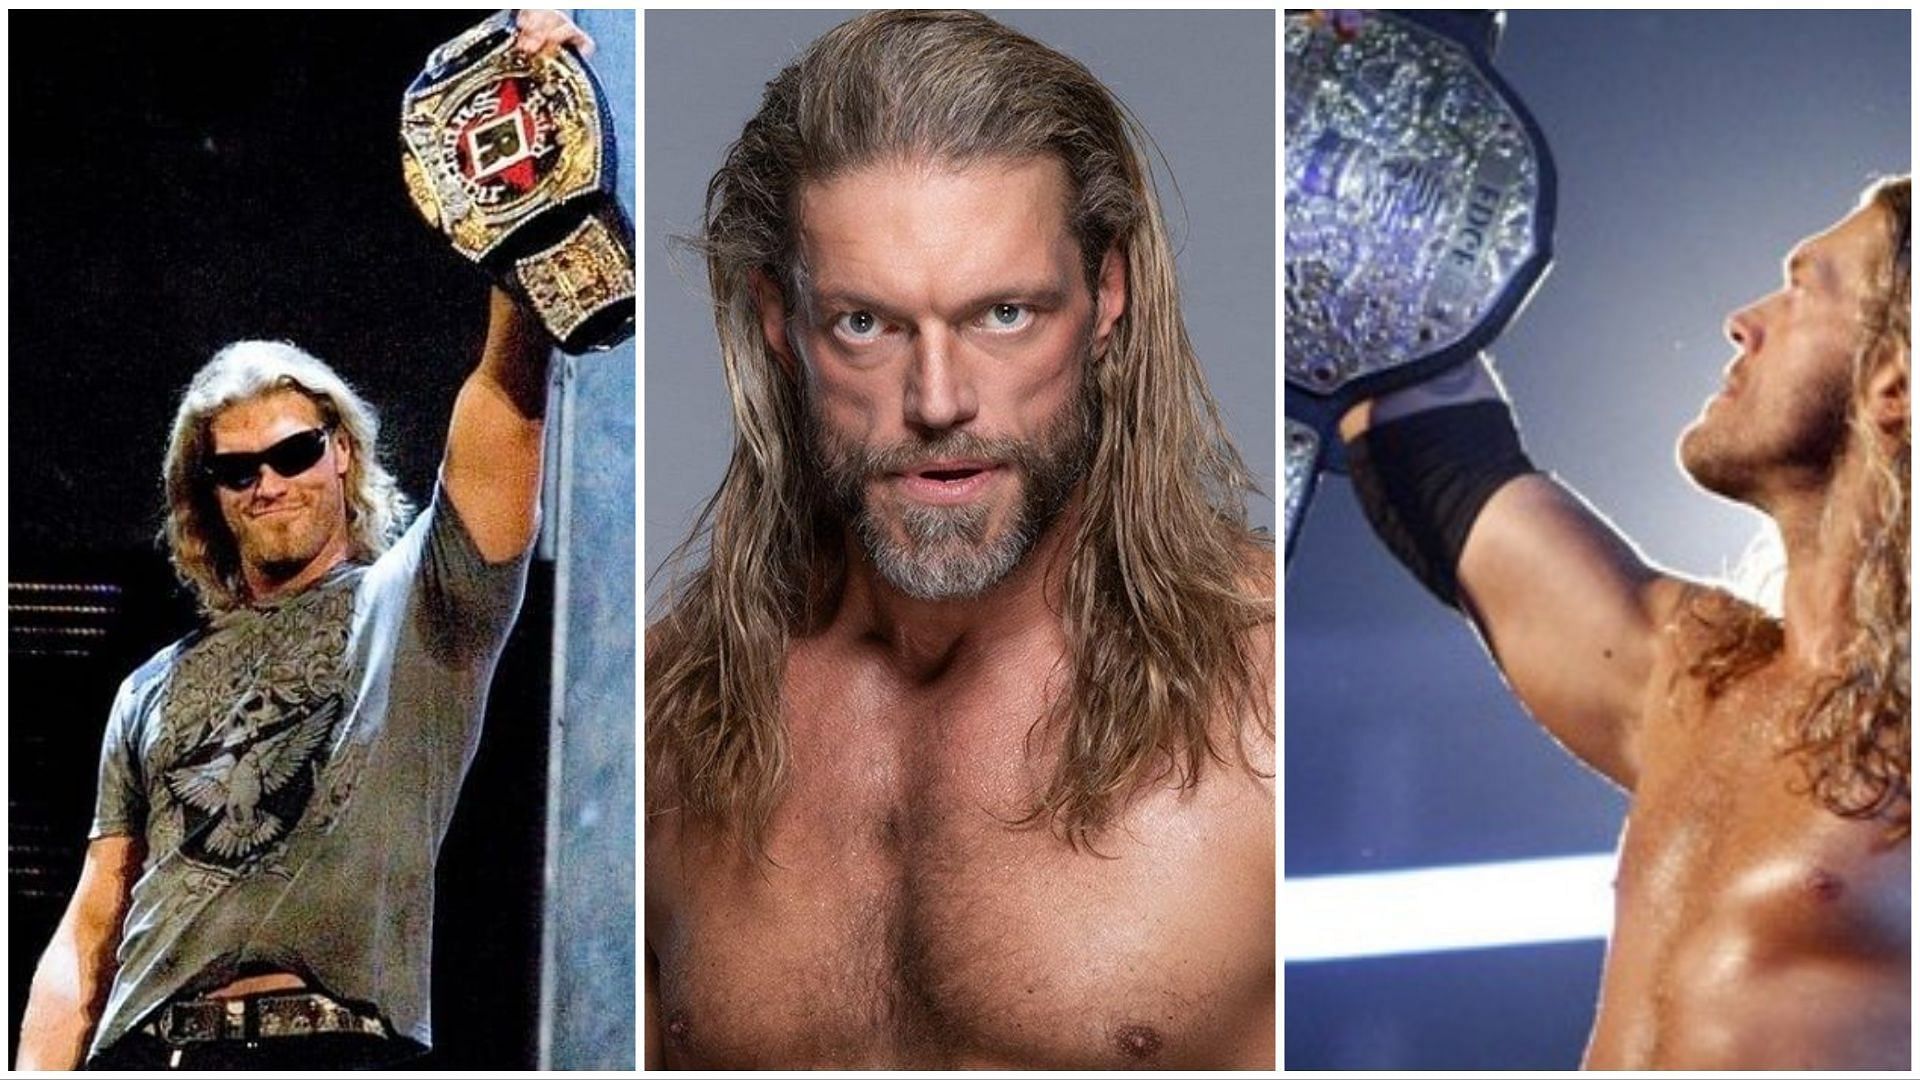 The Rated-R Superstar Edge has to win the WWE World Heavyweight Championship.